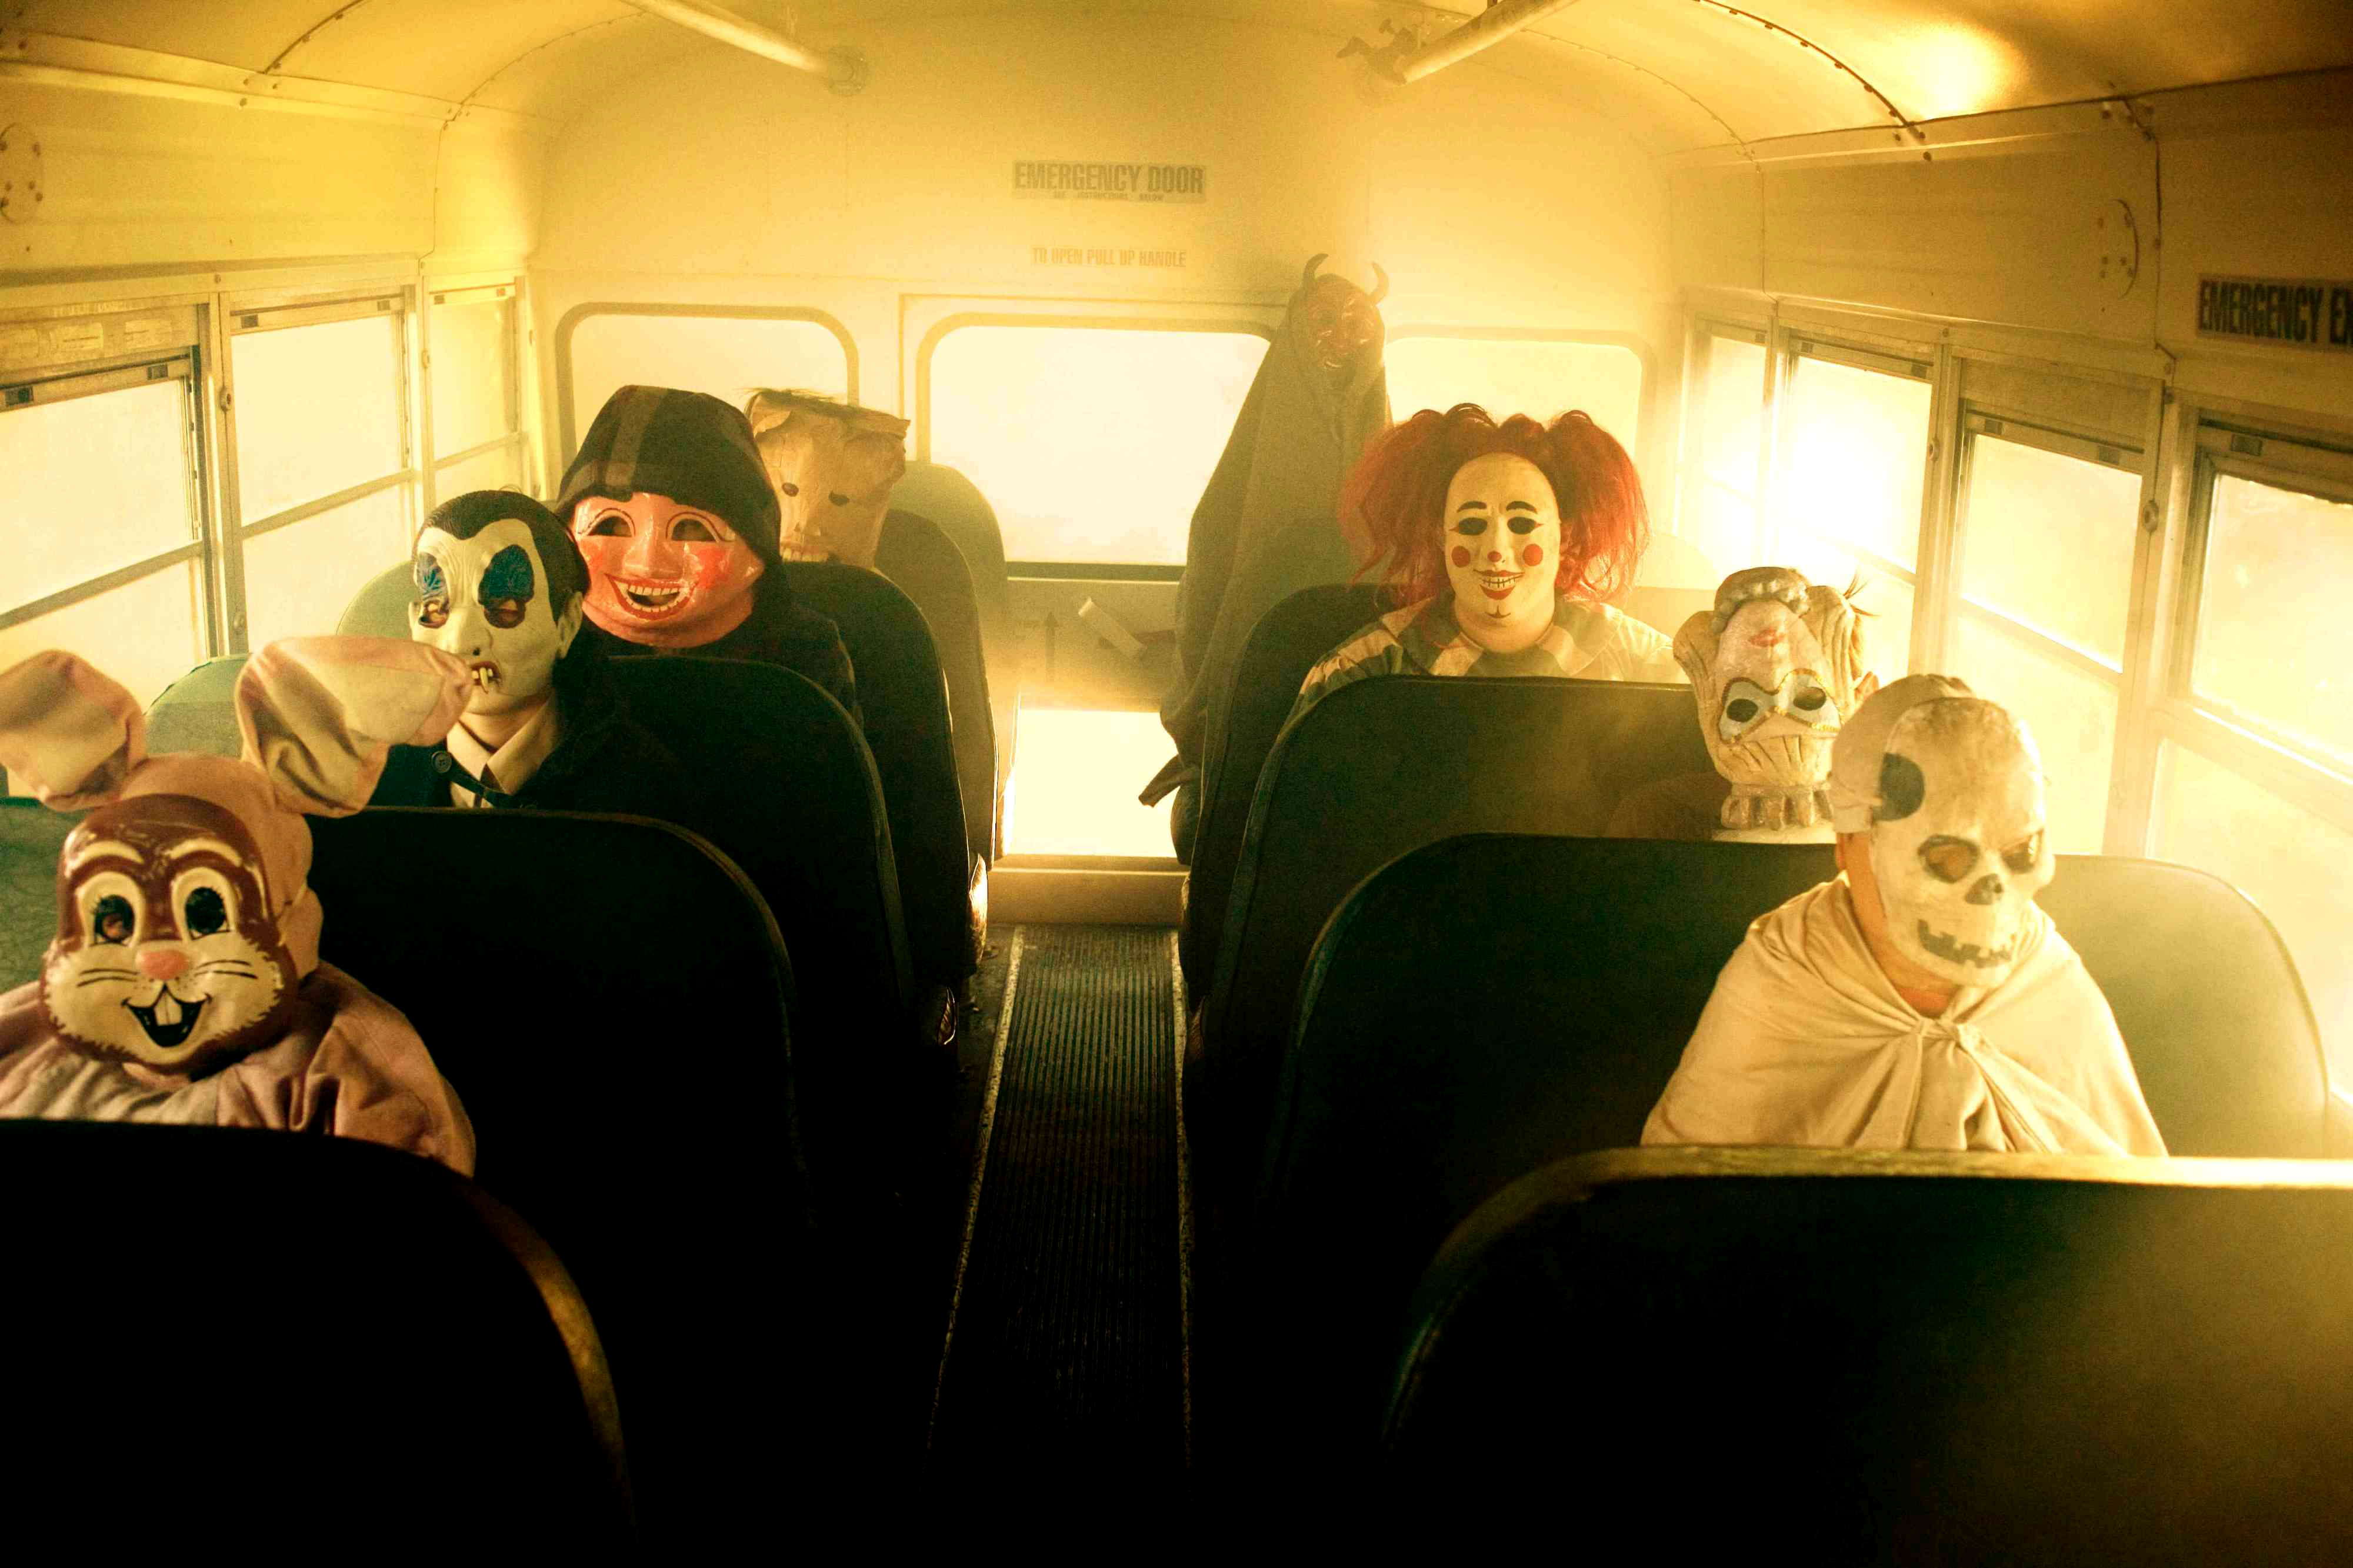 A scene from Warner Bros. Pictures' Trick 'r Treat (2009). Photo credit by Joseph Lederer.